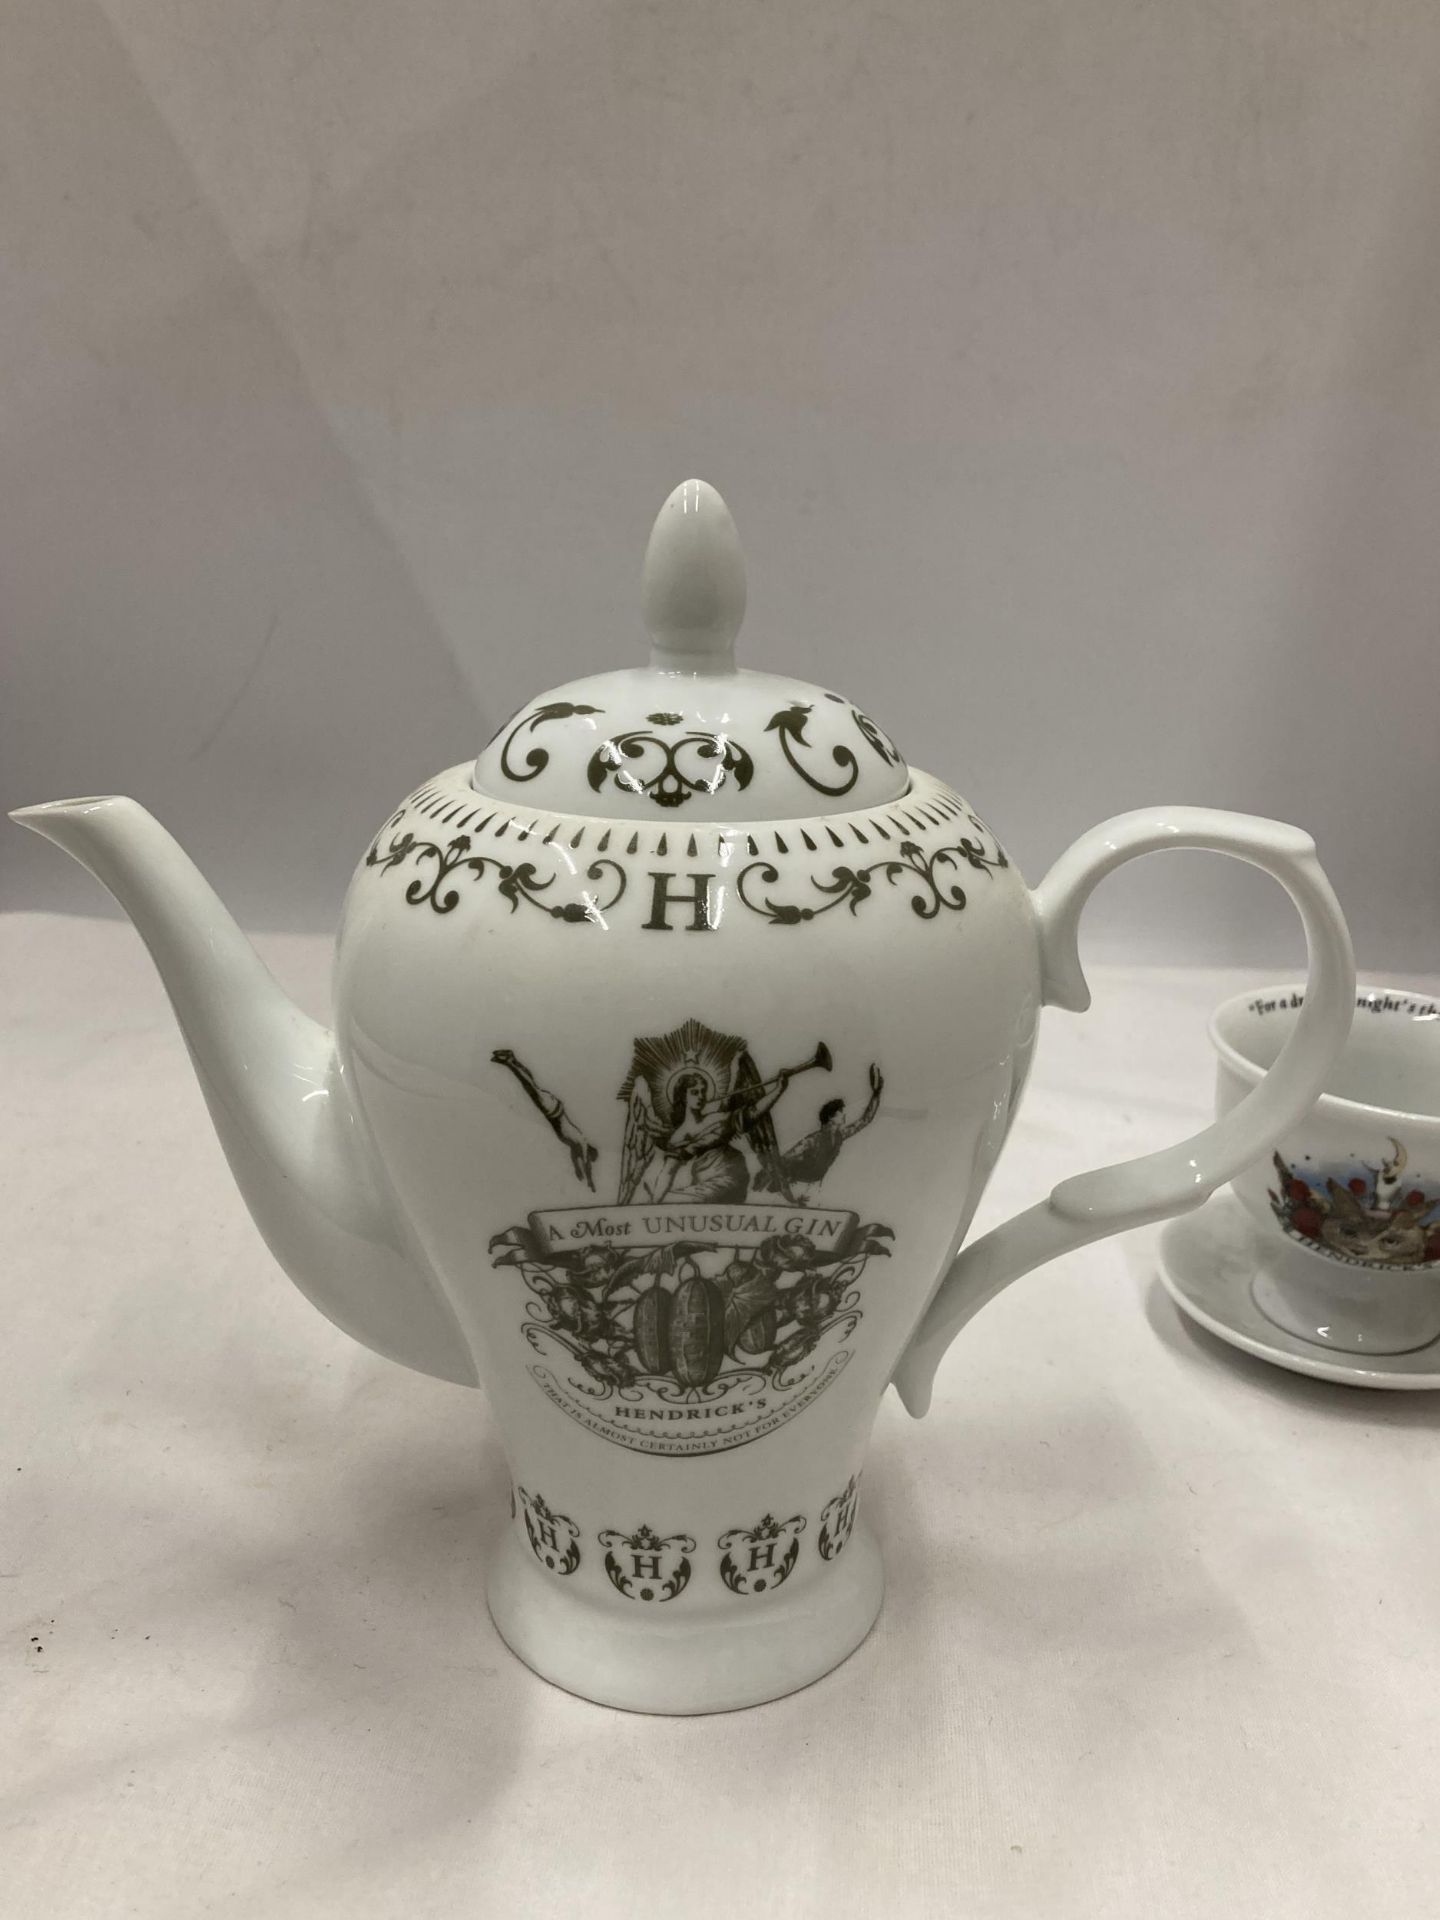 A HENDRICKS TEAPOT AND CUP AND SAUCER - Image 7 of 7